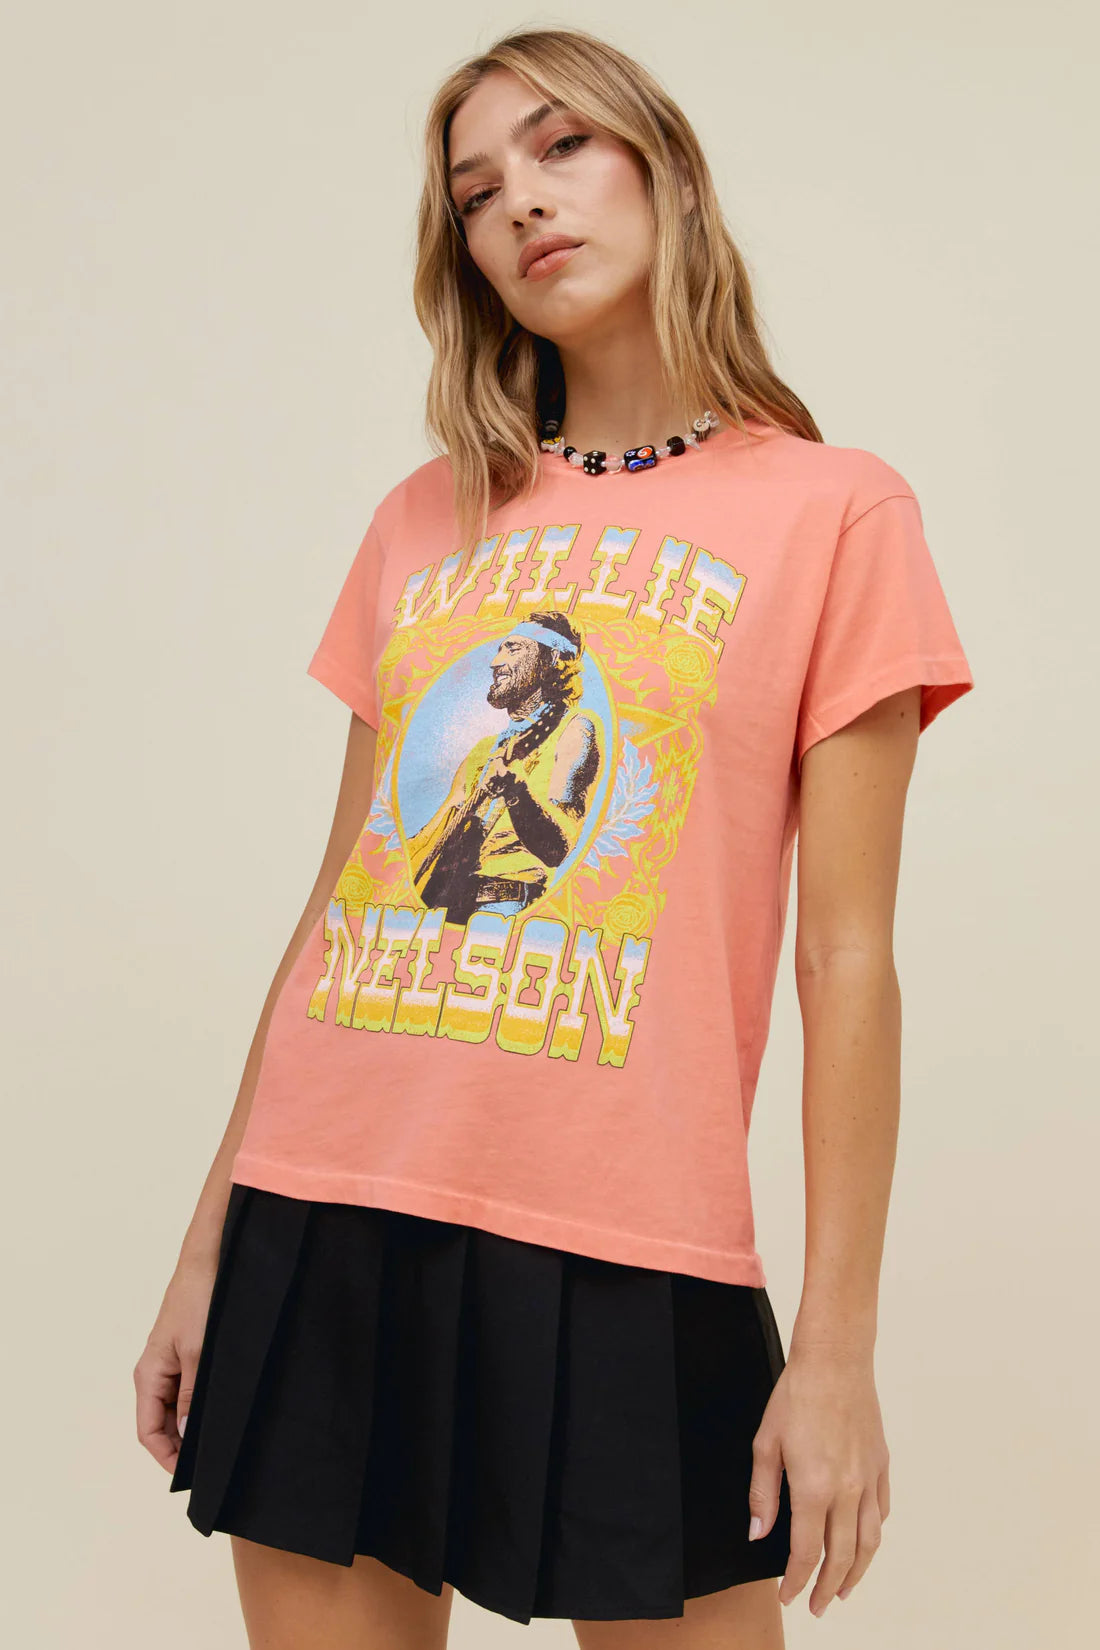 DAYDREAMER Willie Nelson Outlaw Country Tour Tee